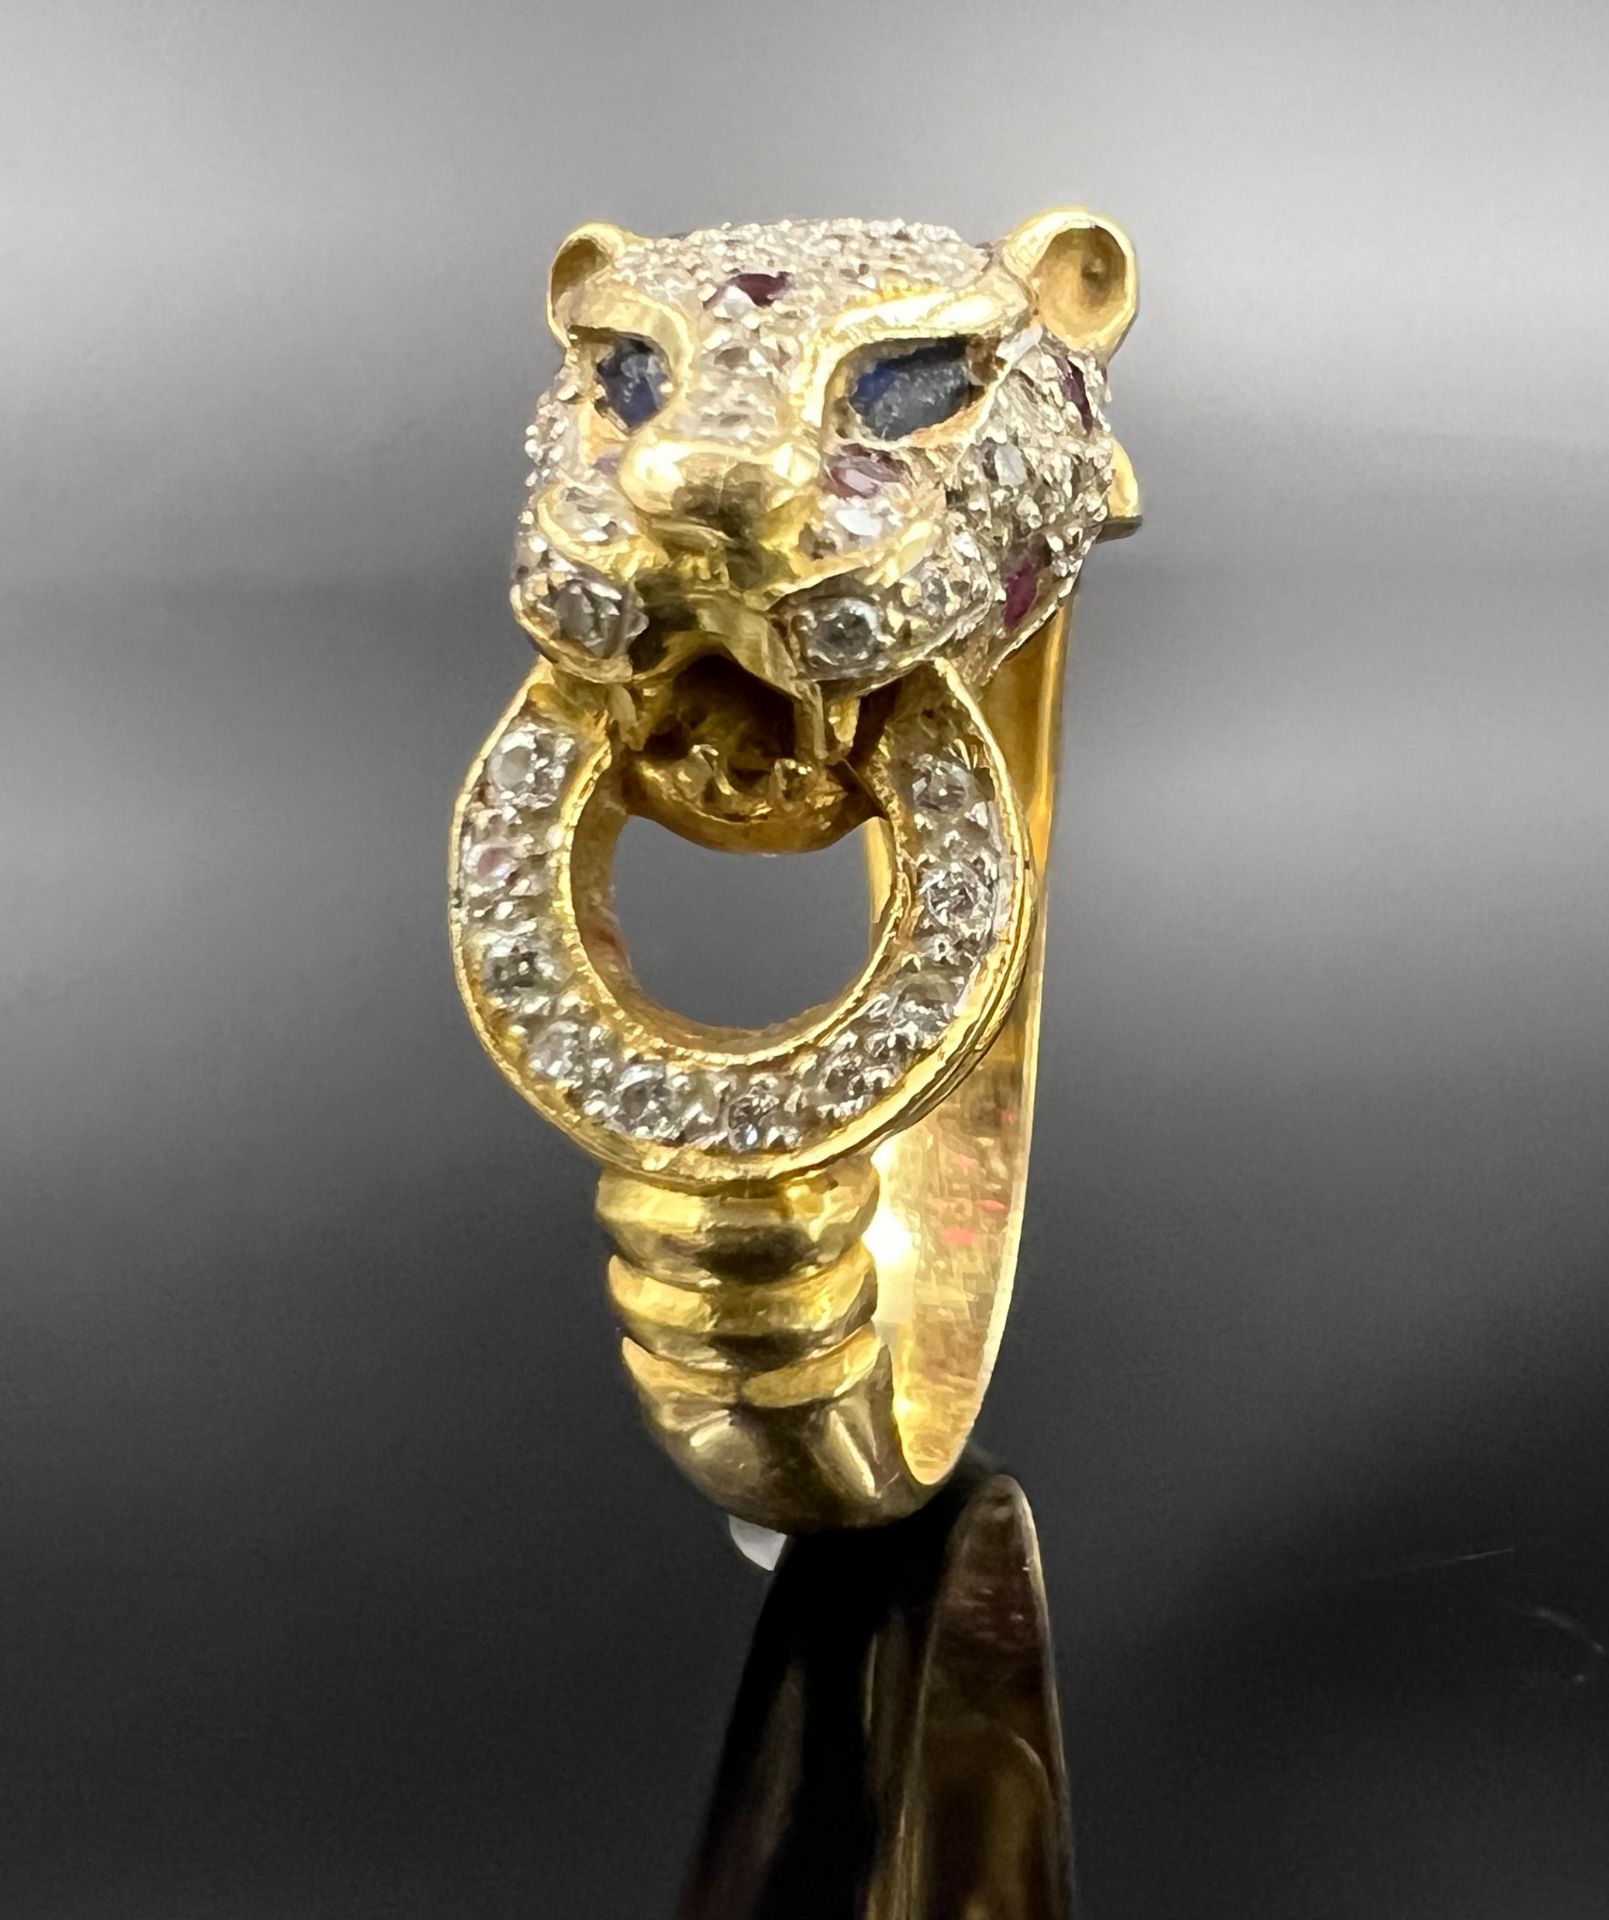 Ladies' ring "Cheetah". 750 yellow gold and white gold with gemstone setting.